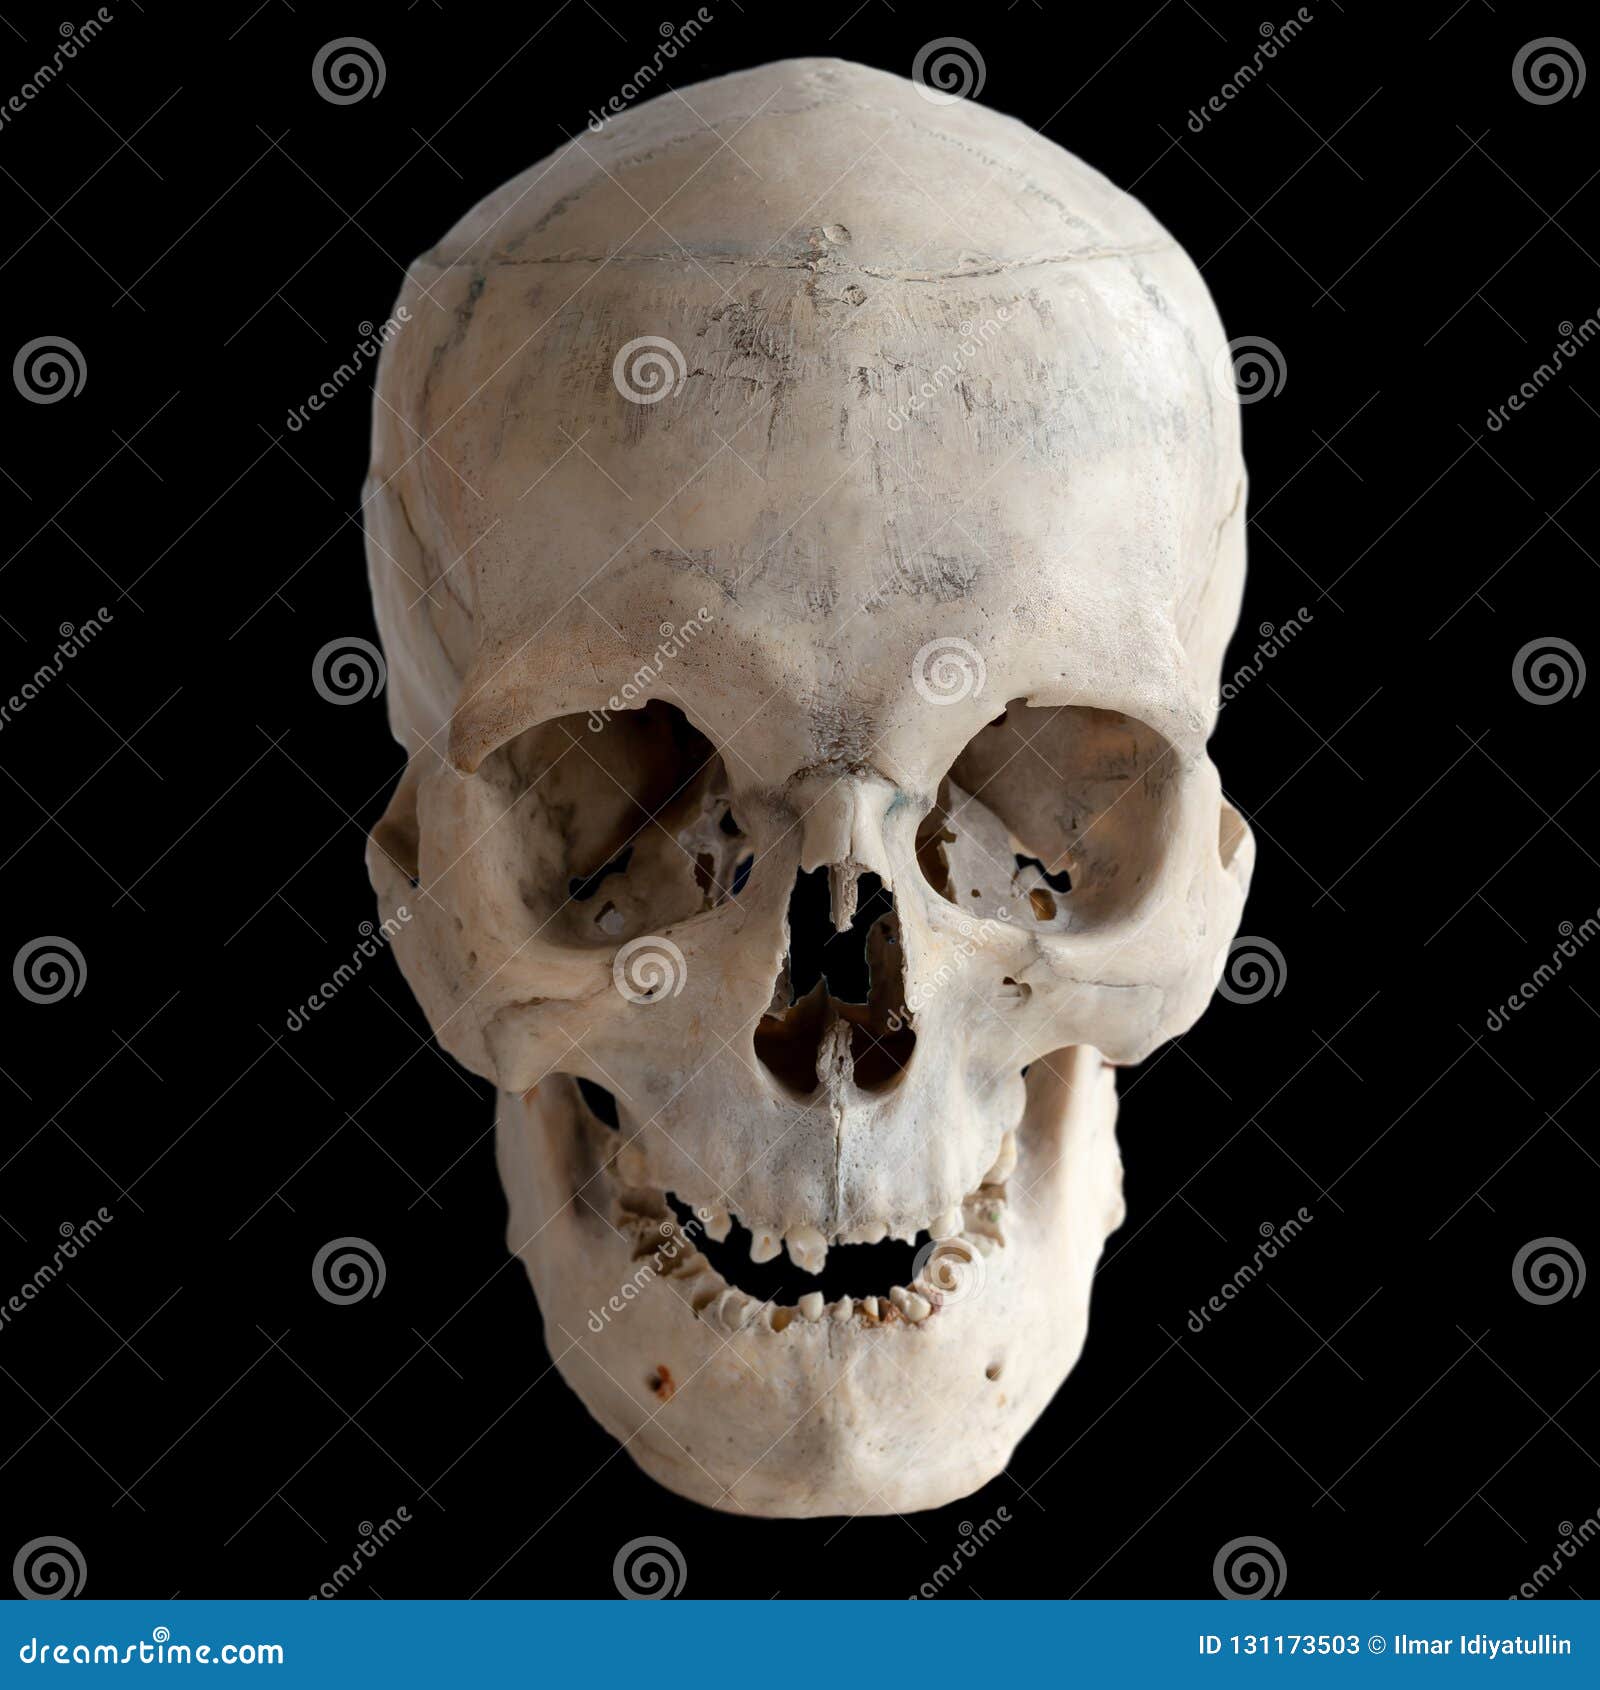 971 Real Human Skull Photos Free Royalty Free Stock Photos From Dreamstime